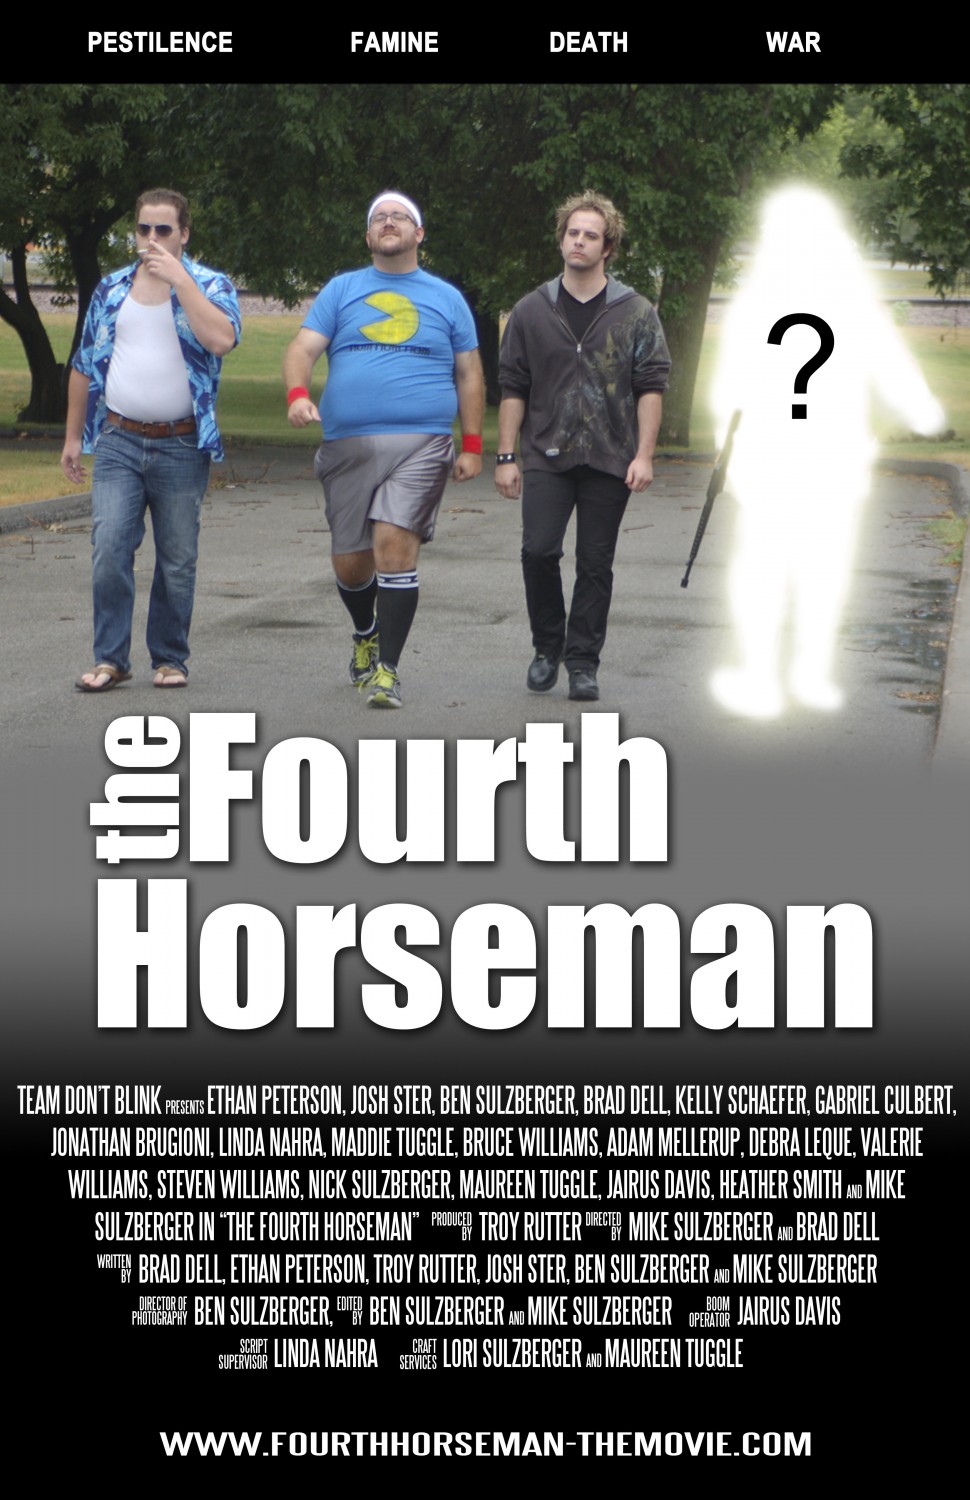 Extra Large Movie Poster Image for The Fourth Horseman